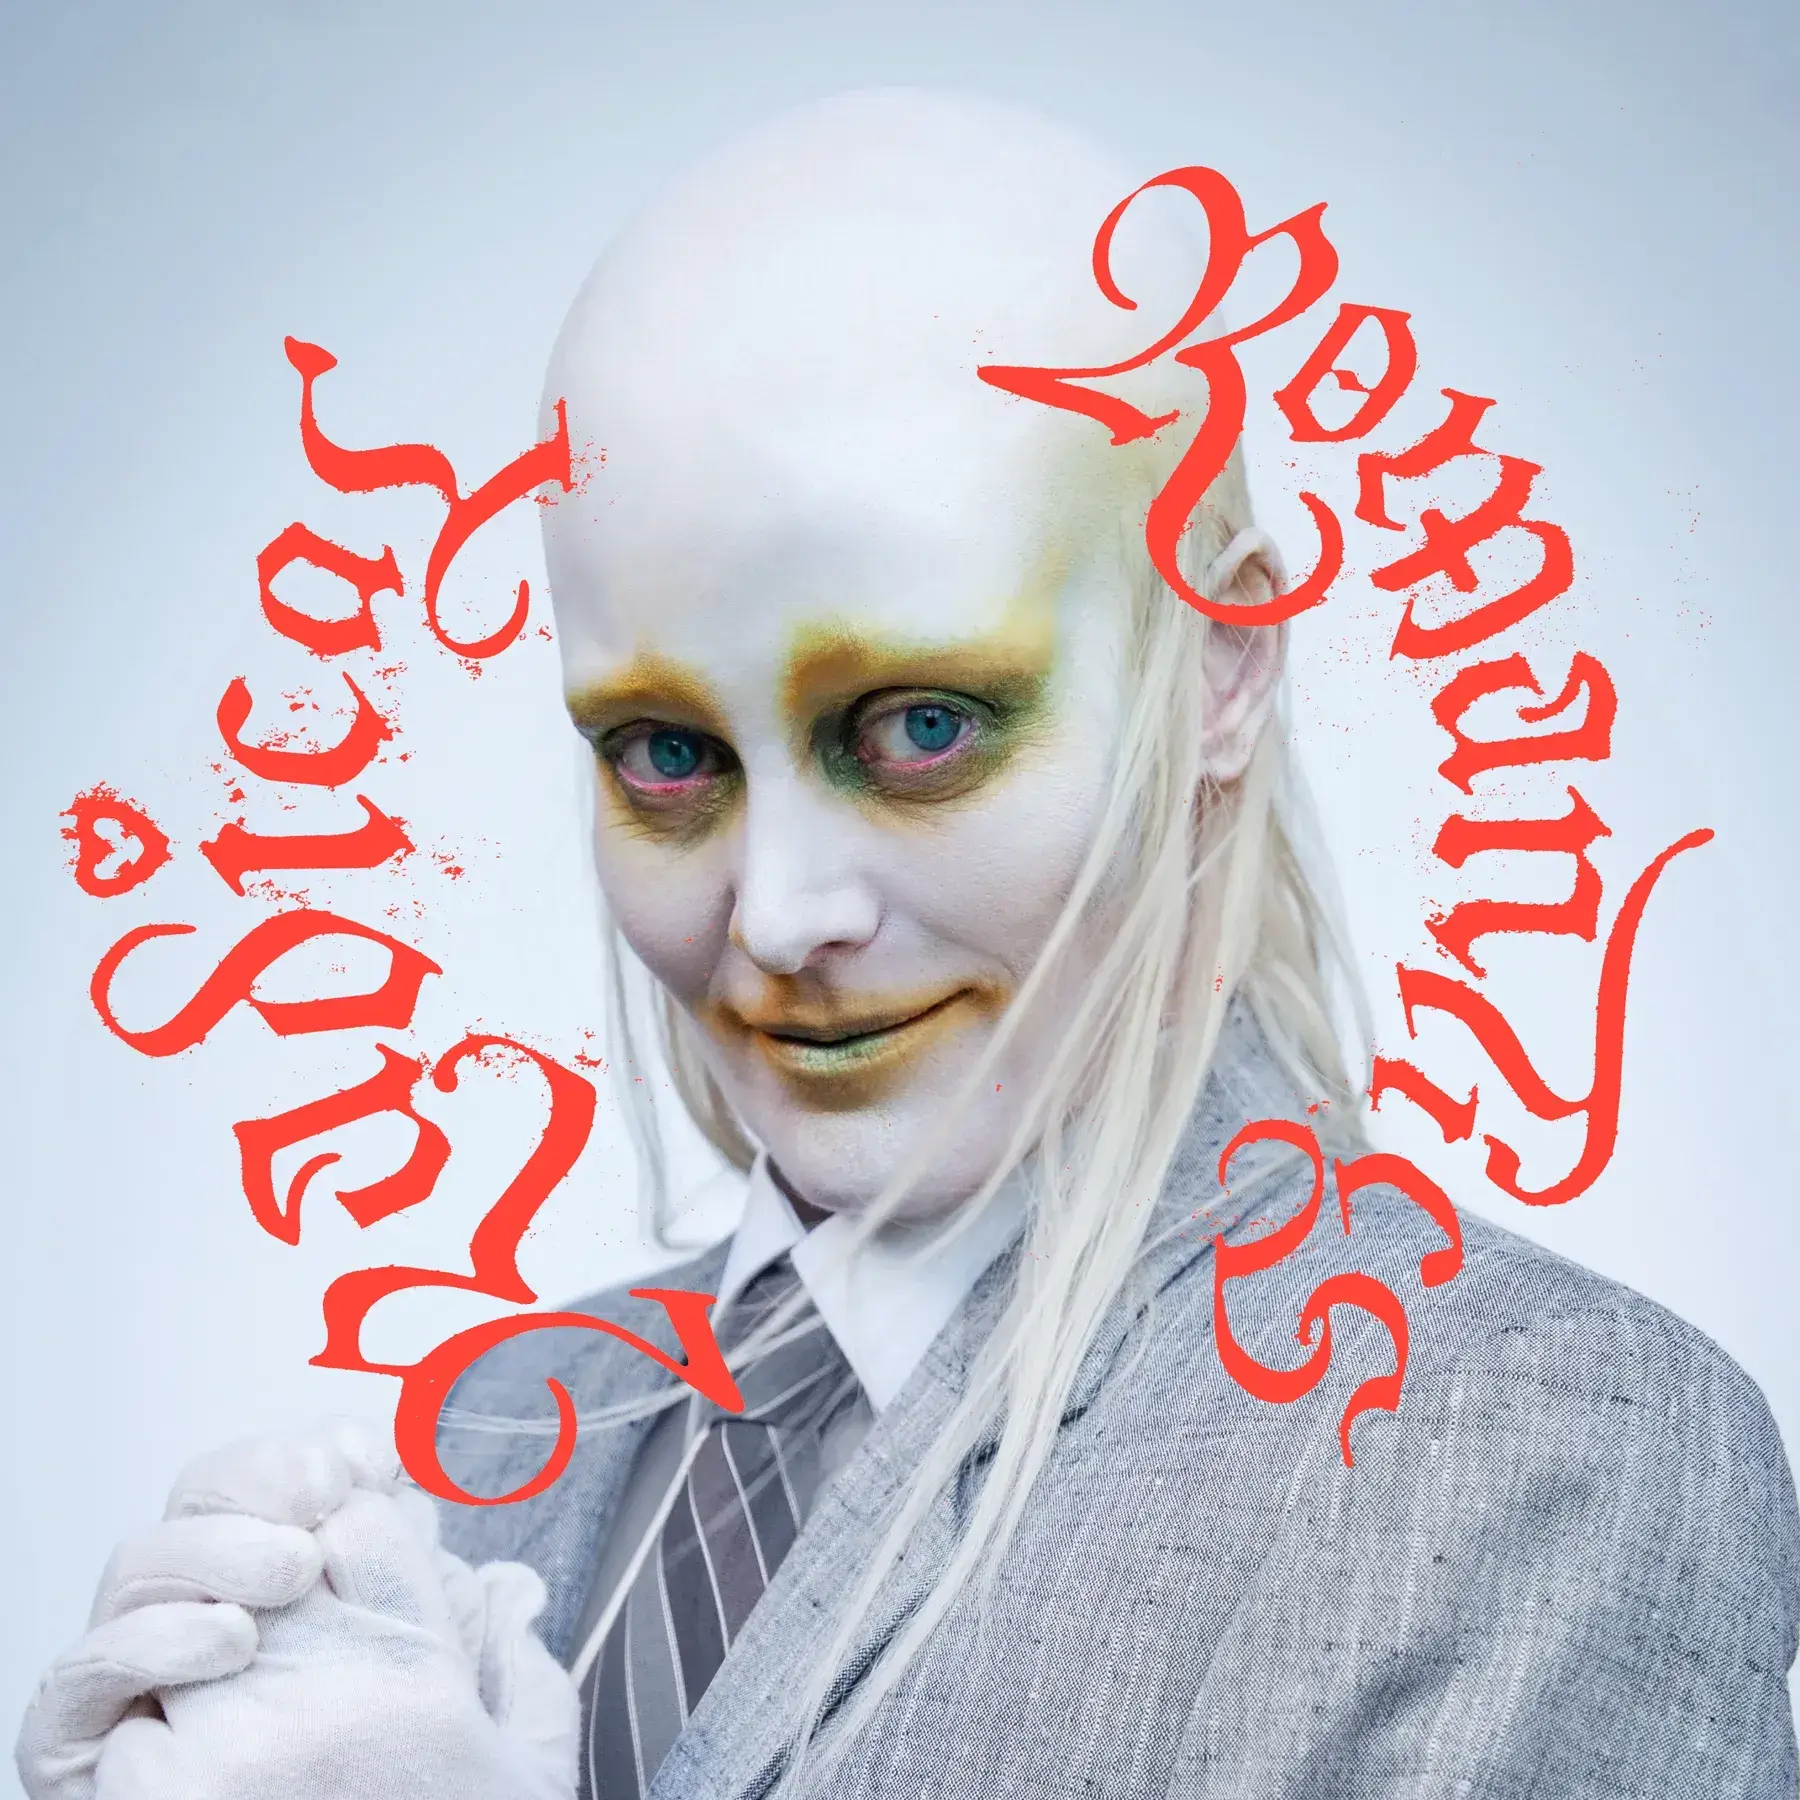 Radical Romantics by Fever Ray album review by Adam Fink for Northern Transmissions